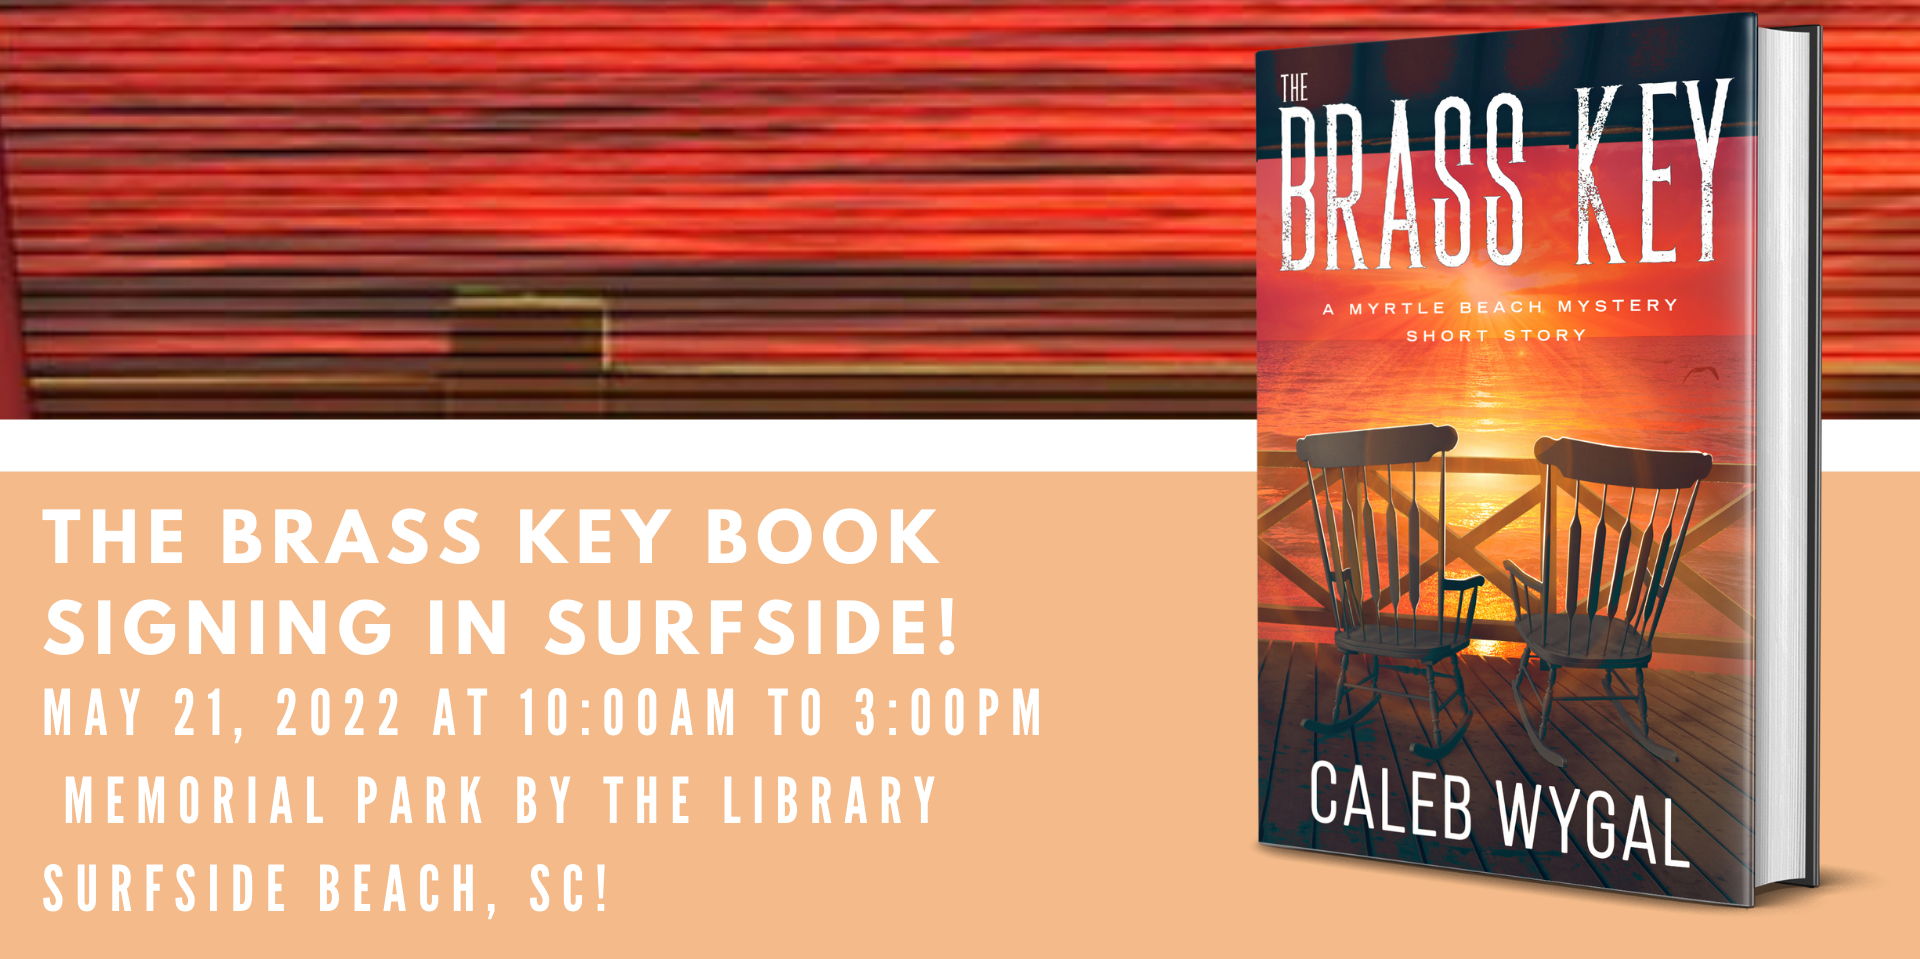 The Brass Key Book Signing in Surfside! promotional image